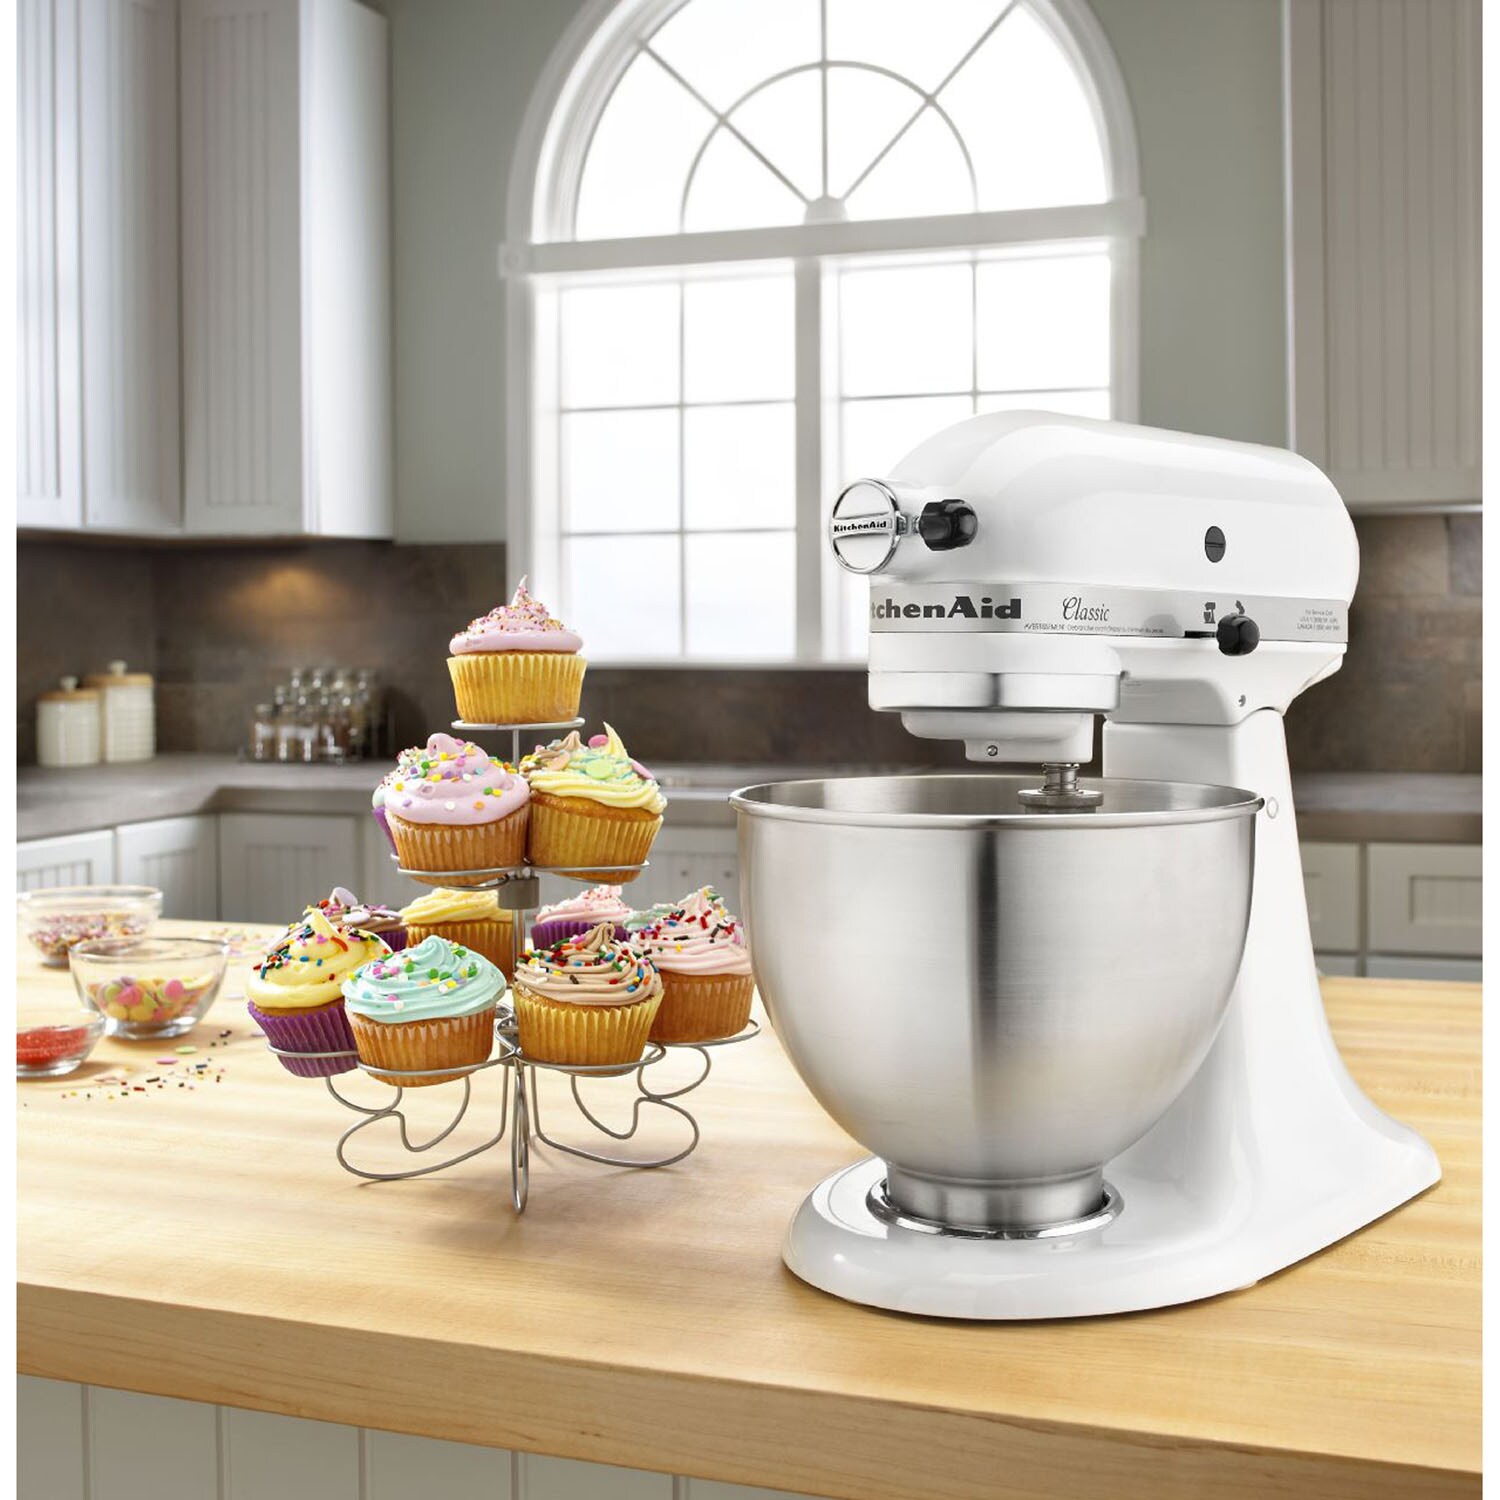 Series 4.5-Quart 10-Speed White Stand Mixer at Lowes.com